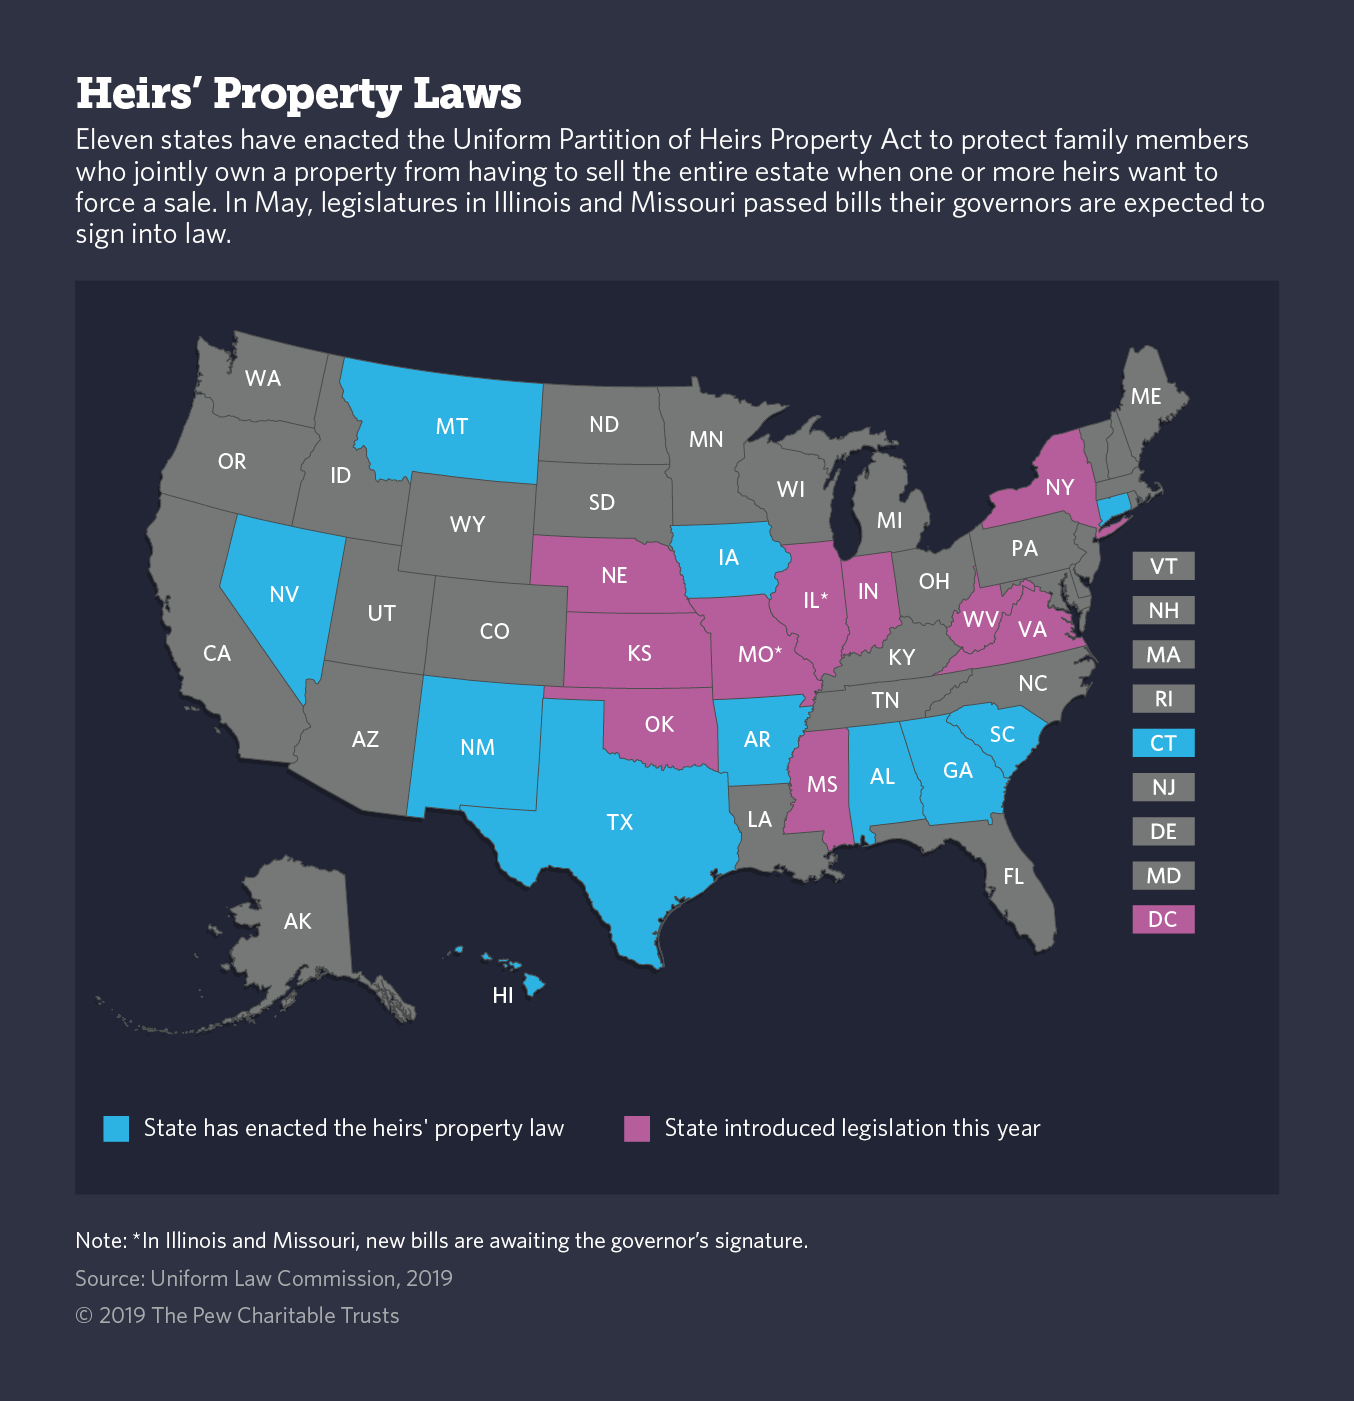 The issue of heirs' property is critical in addressing the racial wealth gap in the United States. It is estimated that over 90% of rural land in the South is held as heirs' property.